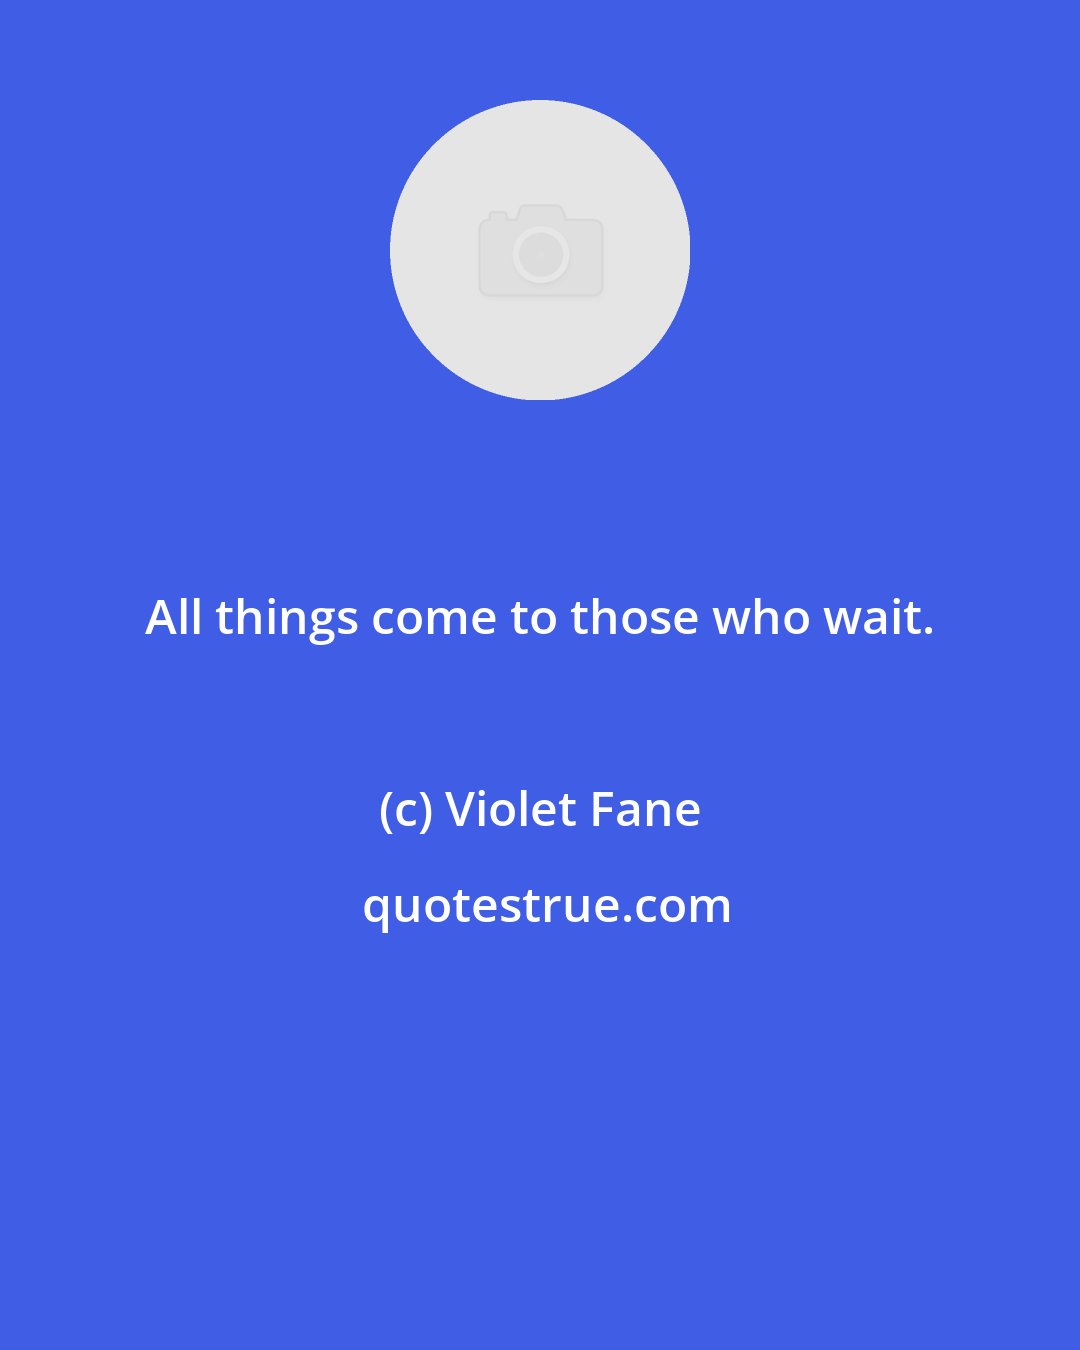 Violet Fane: All things come to those who wait.